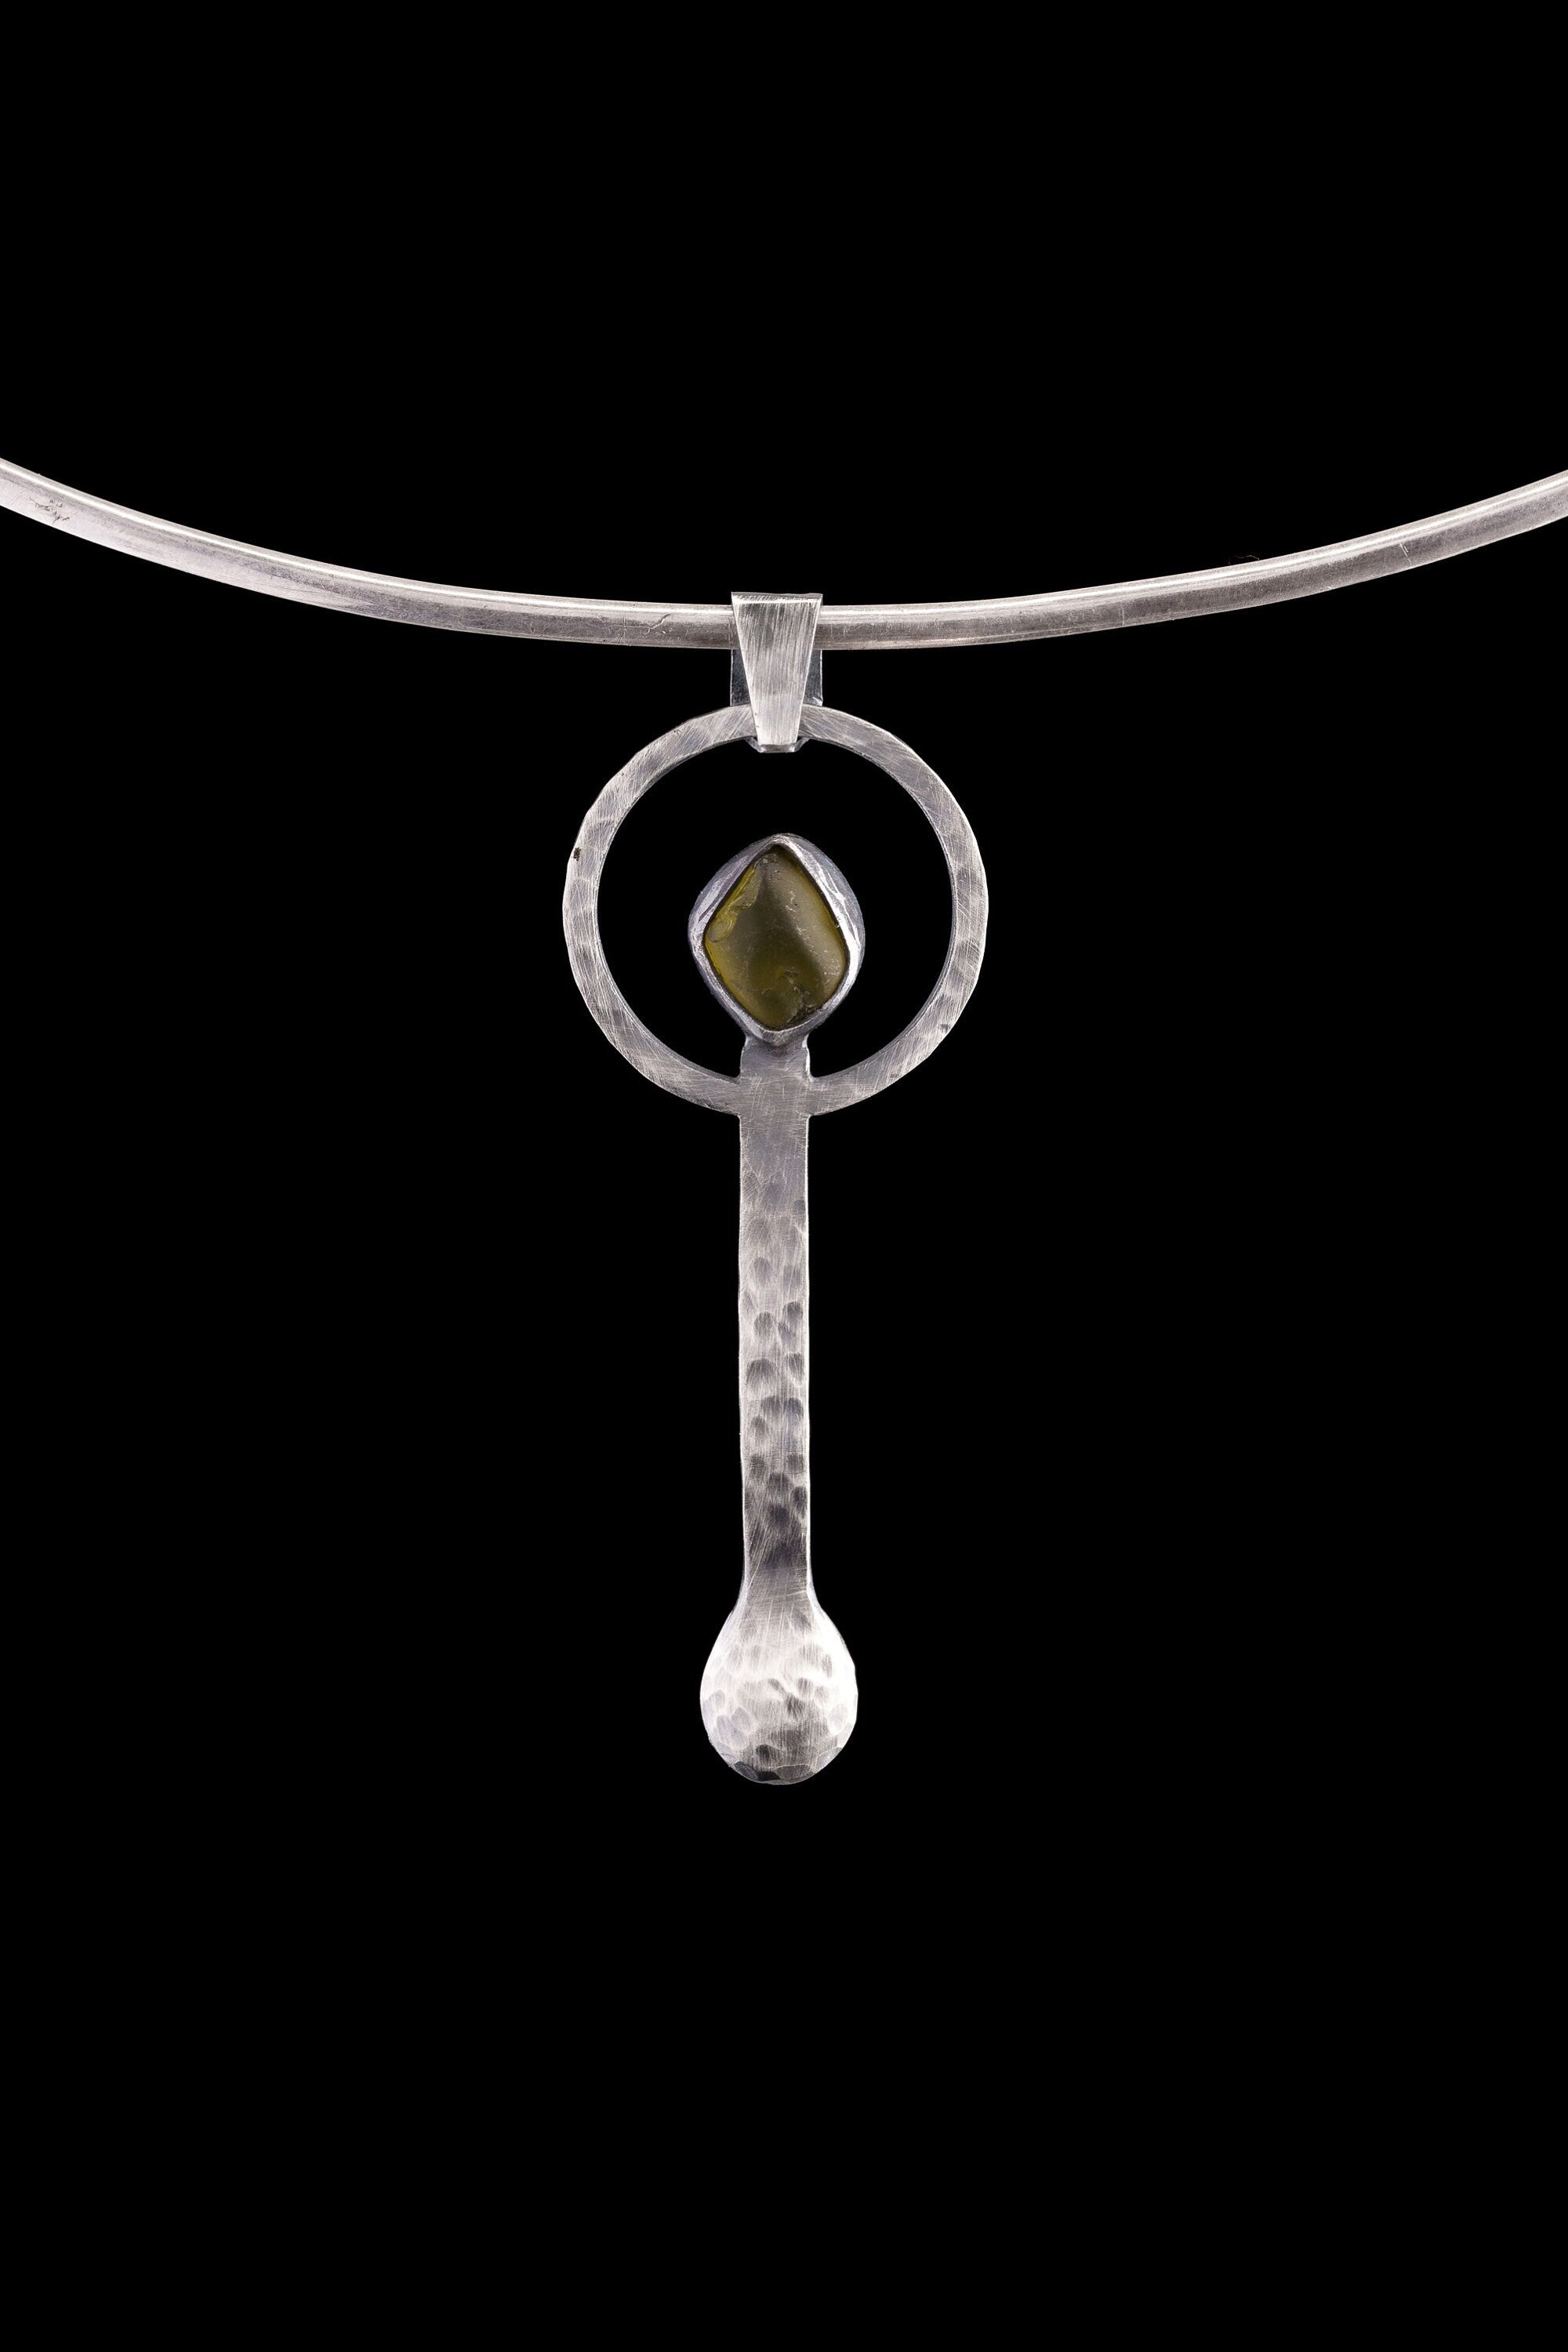 River Tumbled Australian Peridot - Spice / Ceremonial Spoon - 925 Cast Silver - Oxidised Hammer Textured - Crystal Pendant Necklace